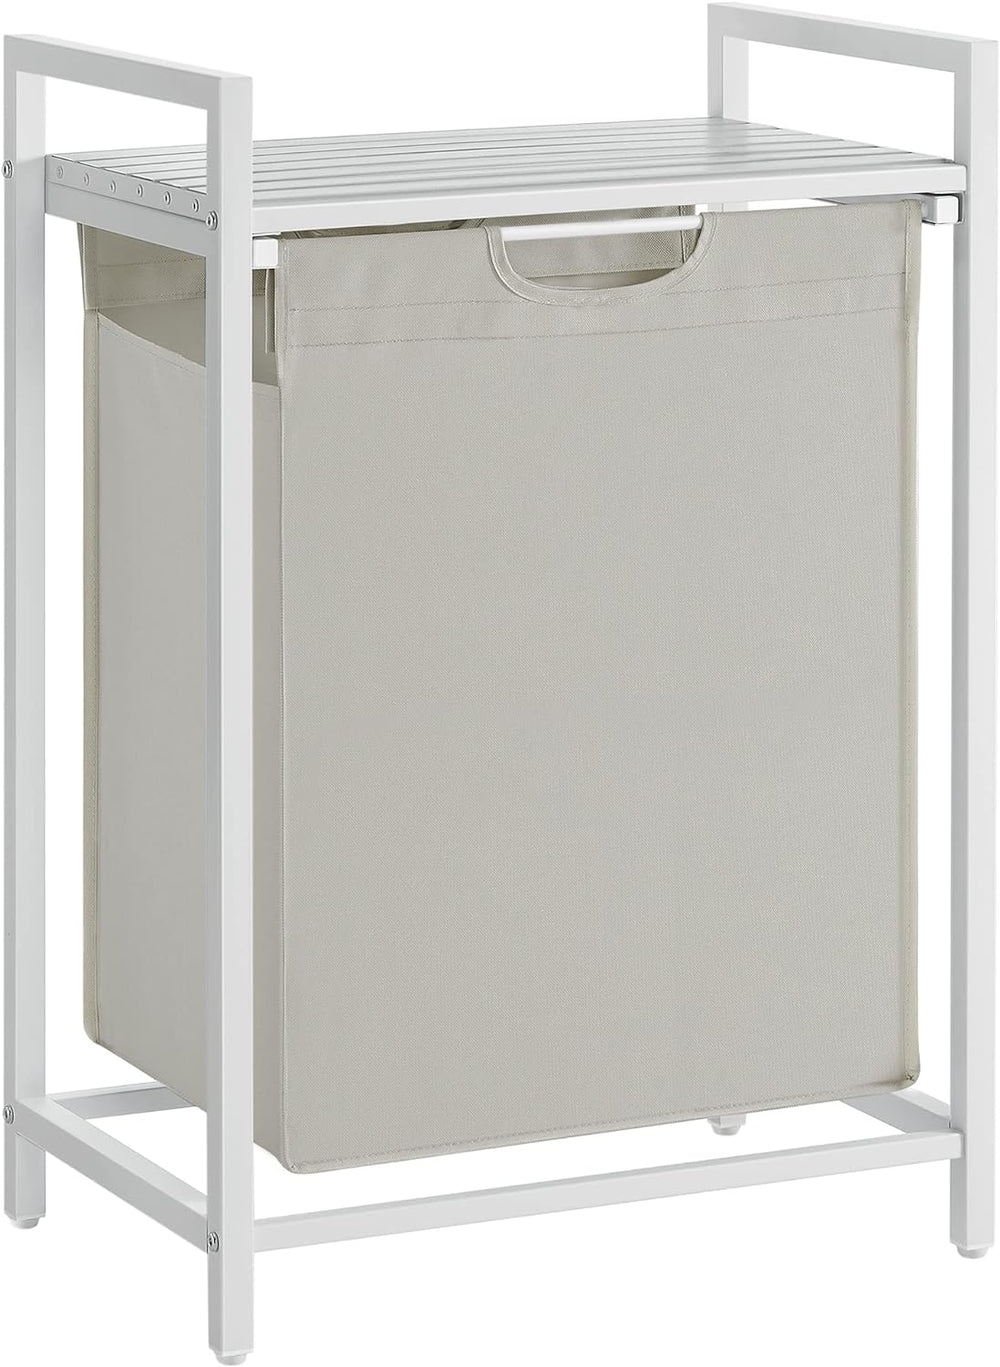 VASAGLE Laundry Hamper with Shelf and Pull-Out Removable Bag 65L White